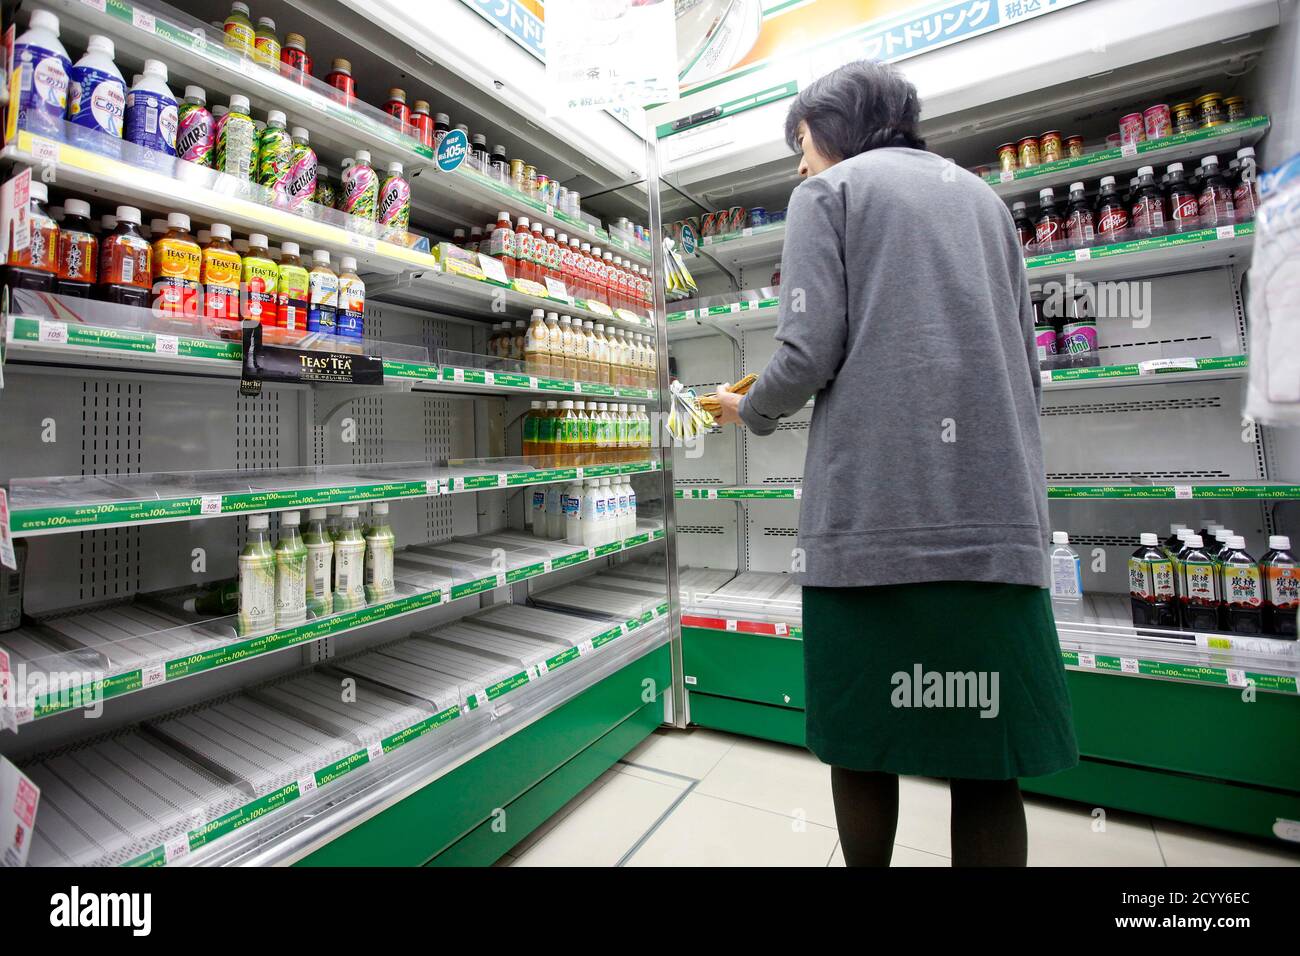 A woman stands near shelves of bottled drinks that are running out at a convenience store in central Tokyo March 24, 2011. Many shops in Tokyo ran out of bottled water on Thursday after radiation from a damaged nuclear plant made tap water unsafe for babies, while more countries imposed curbs on imports of Japanese food. Engineers are trying to stabilise the Fukushima nuclear facility nearly two weeks after an earthquake and tsunami battered the complex and devastated northeast Japan.   REUTERS/Aly Song (JAPAN - Tags: DISASTER FOOD SOCIETY) Stock Photo